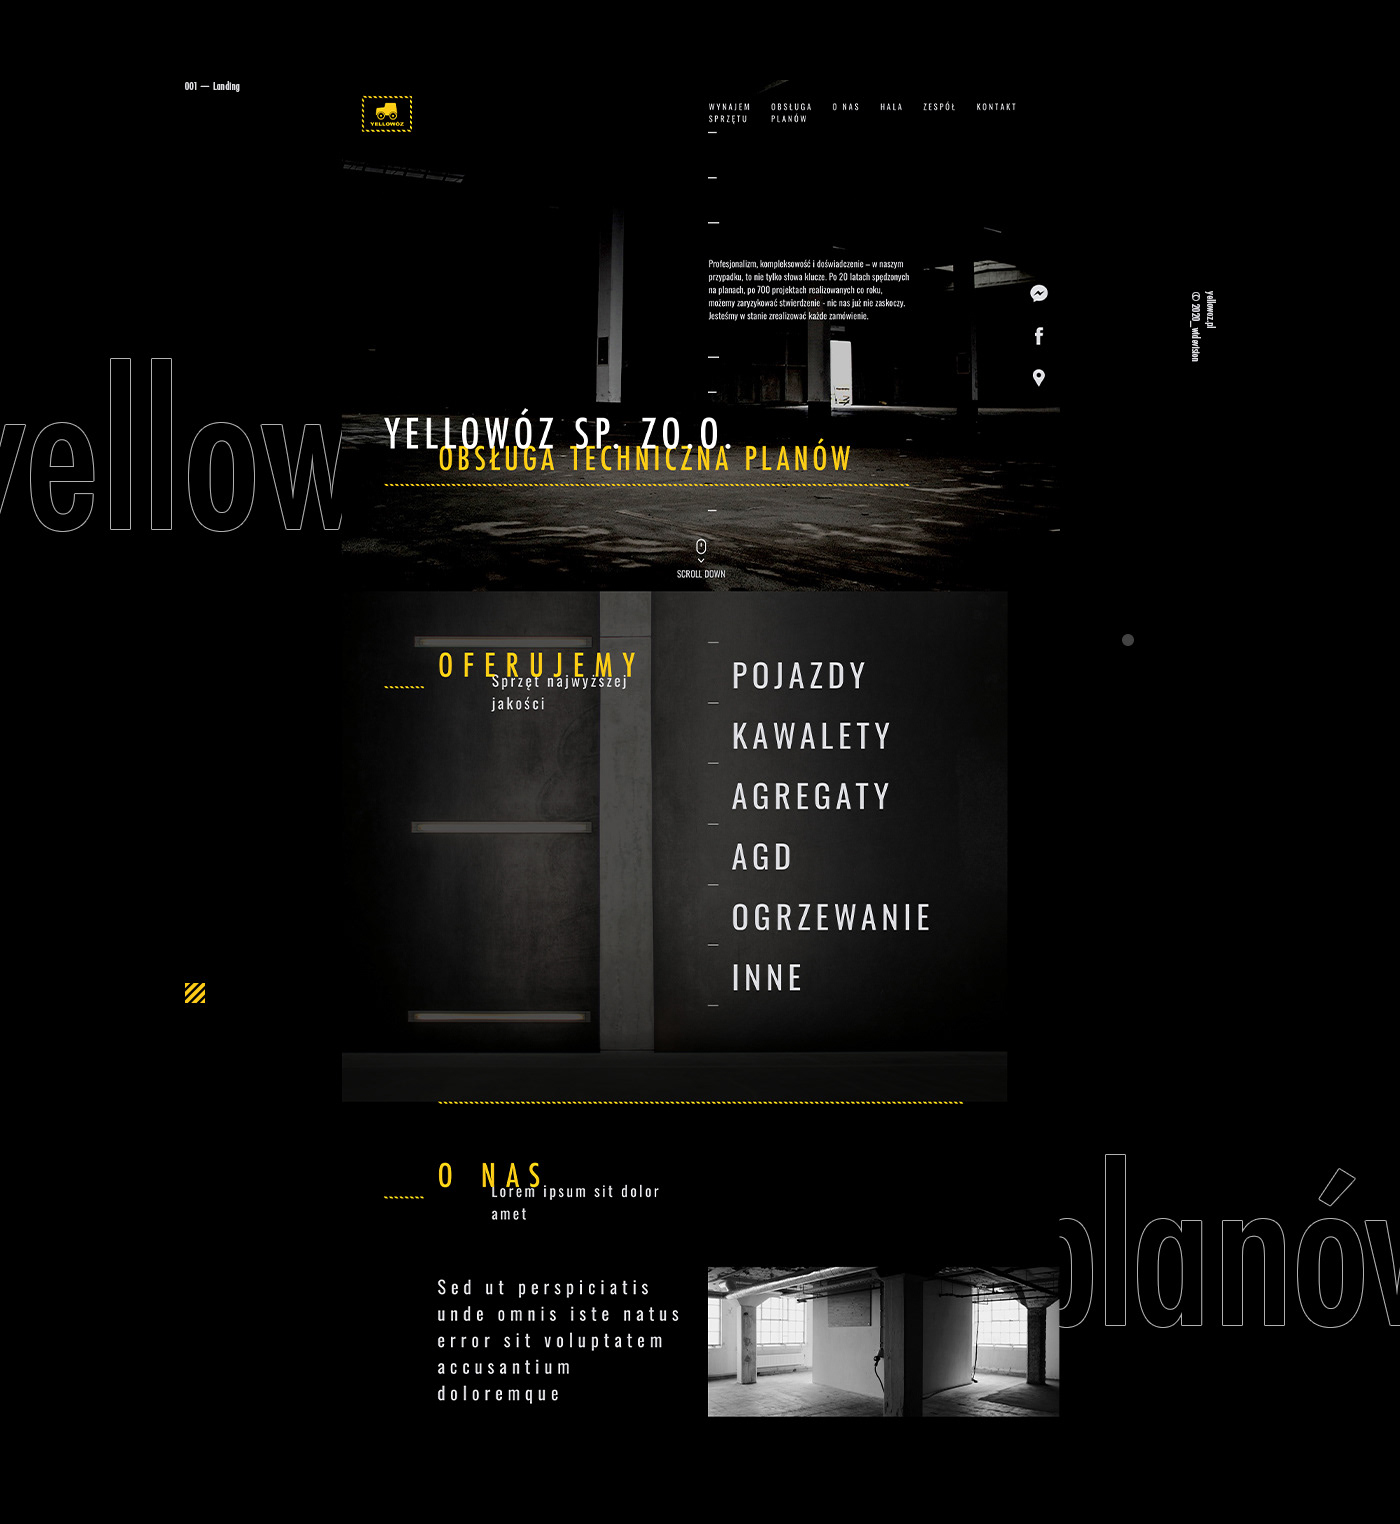 View of a website landing page on a dark background